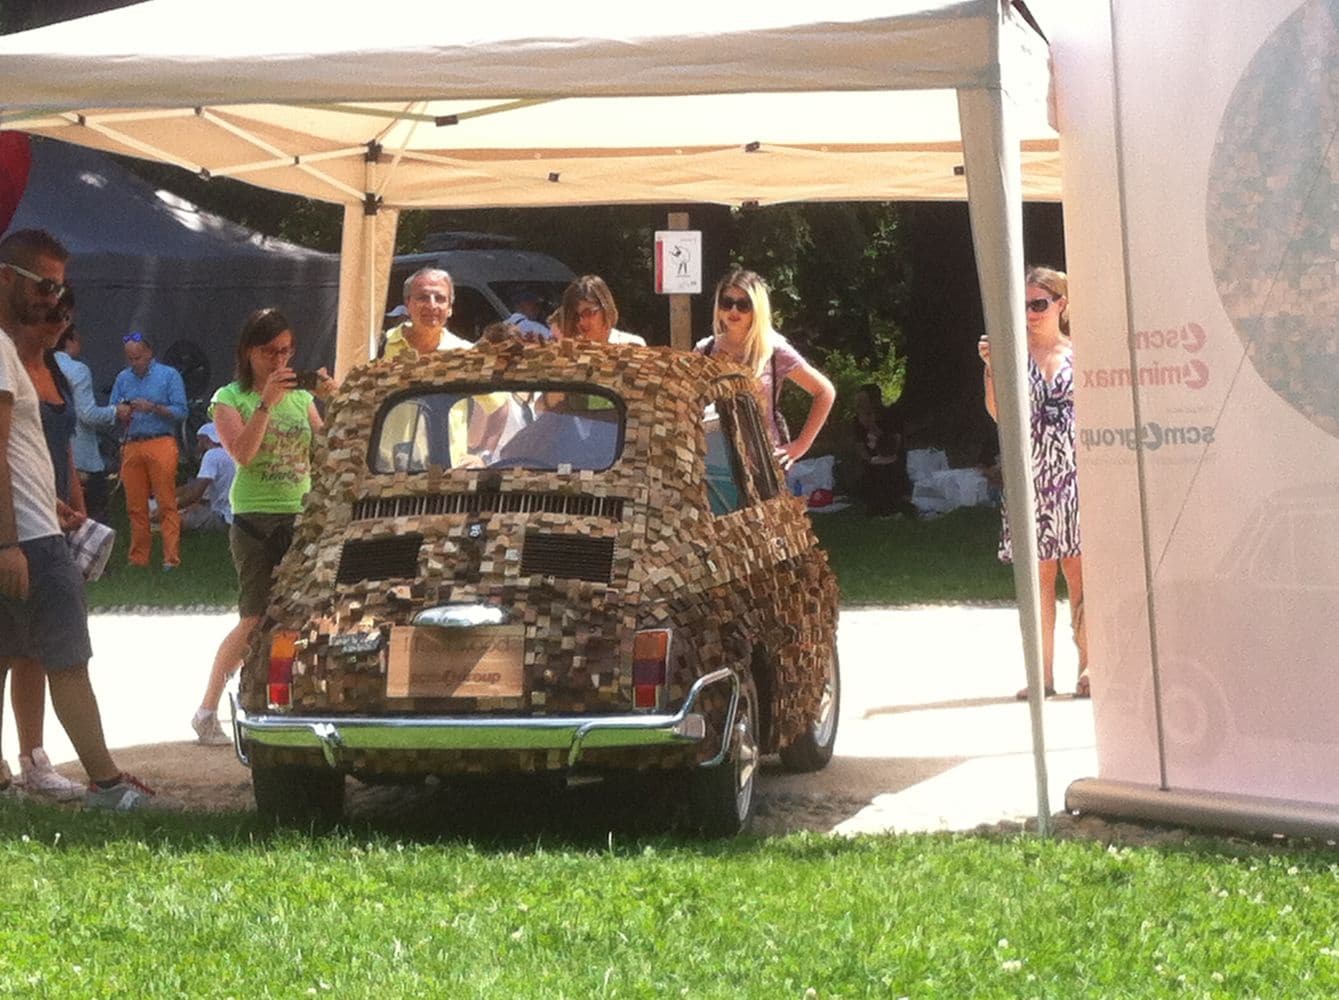 Kube I feel wood, most photographed Fiat 500 at the Birthday celebrations held at the splendid settings of the Parco Sempione in the heart of Milan.